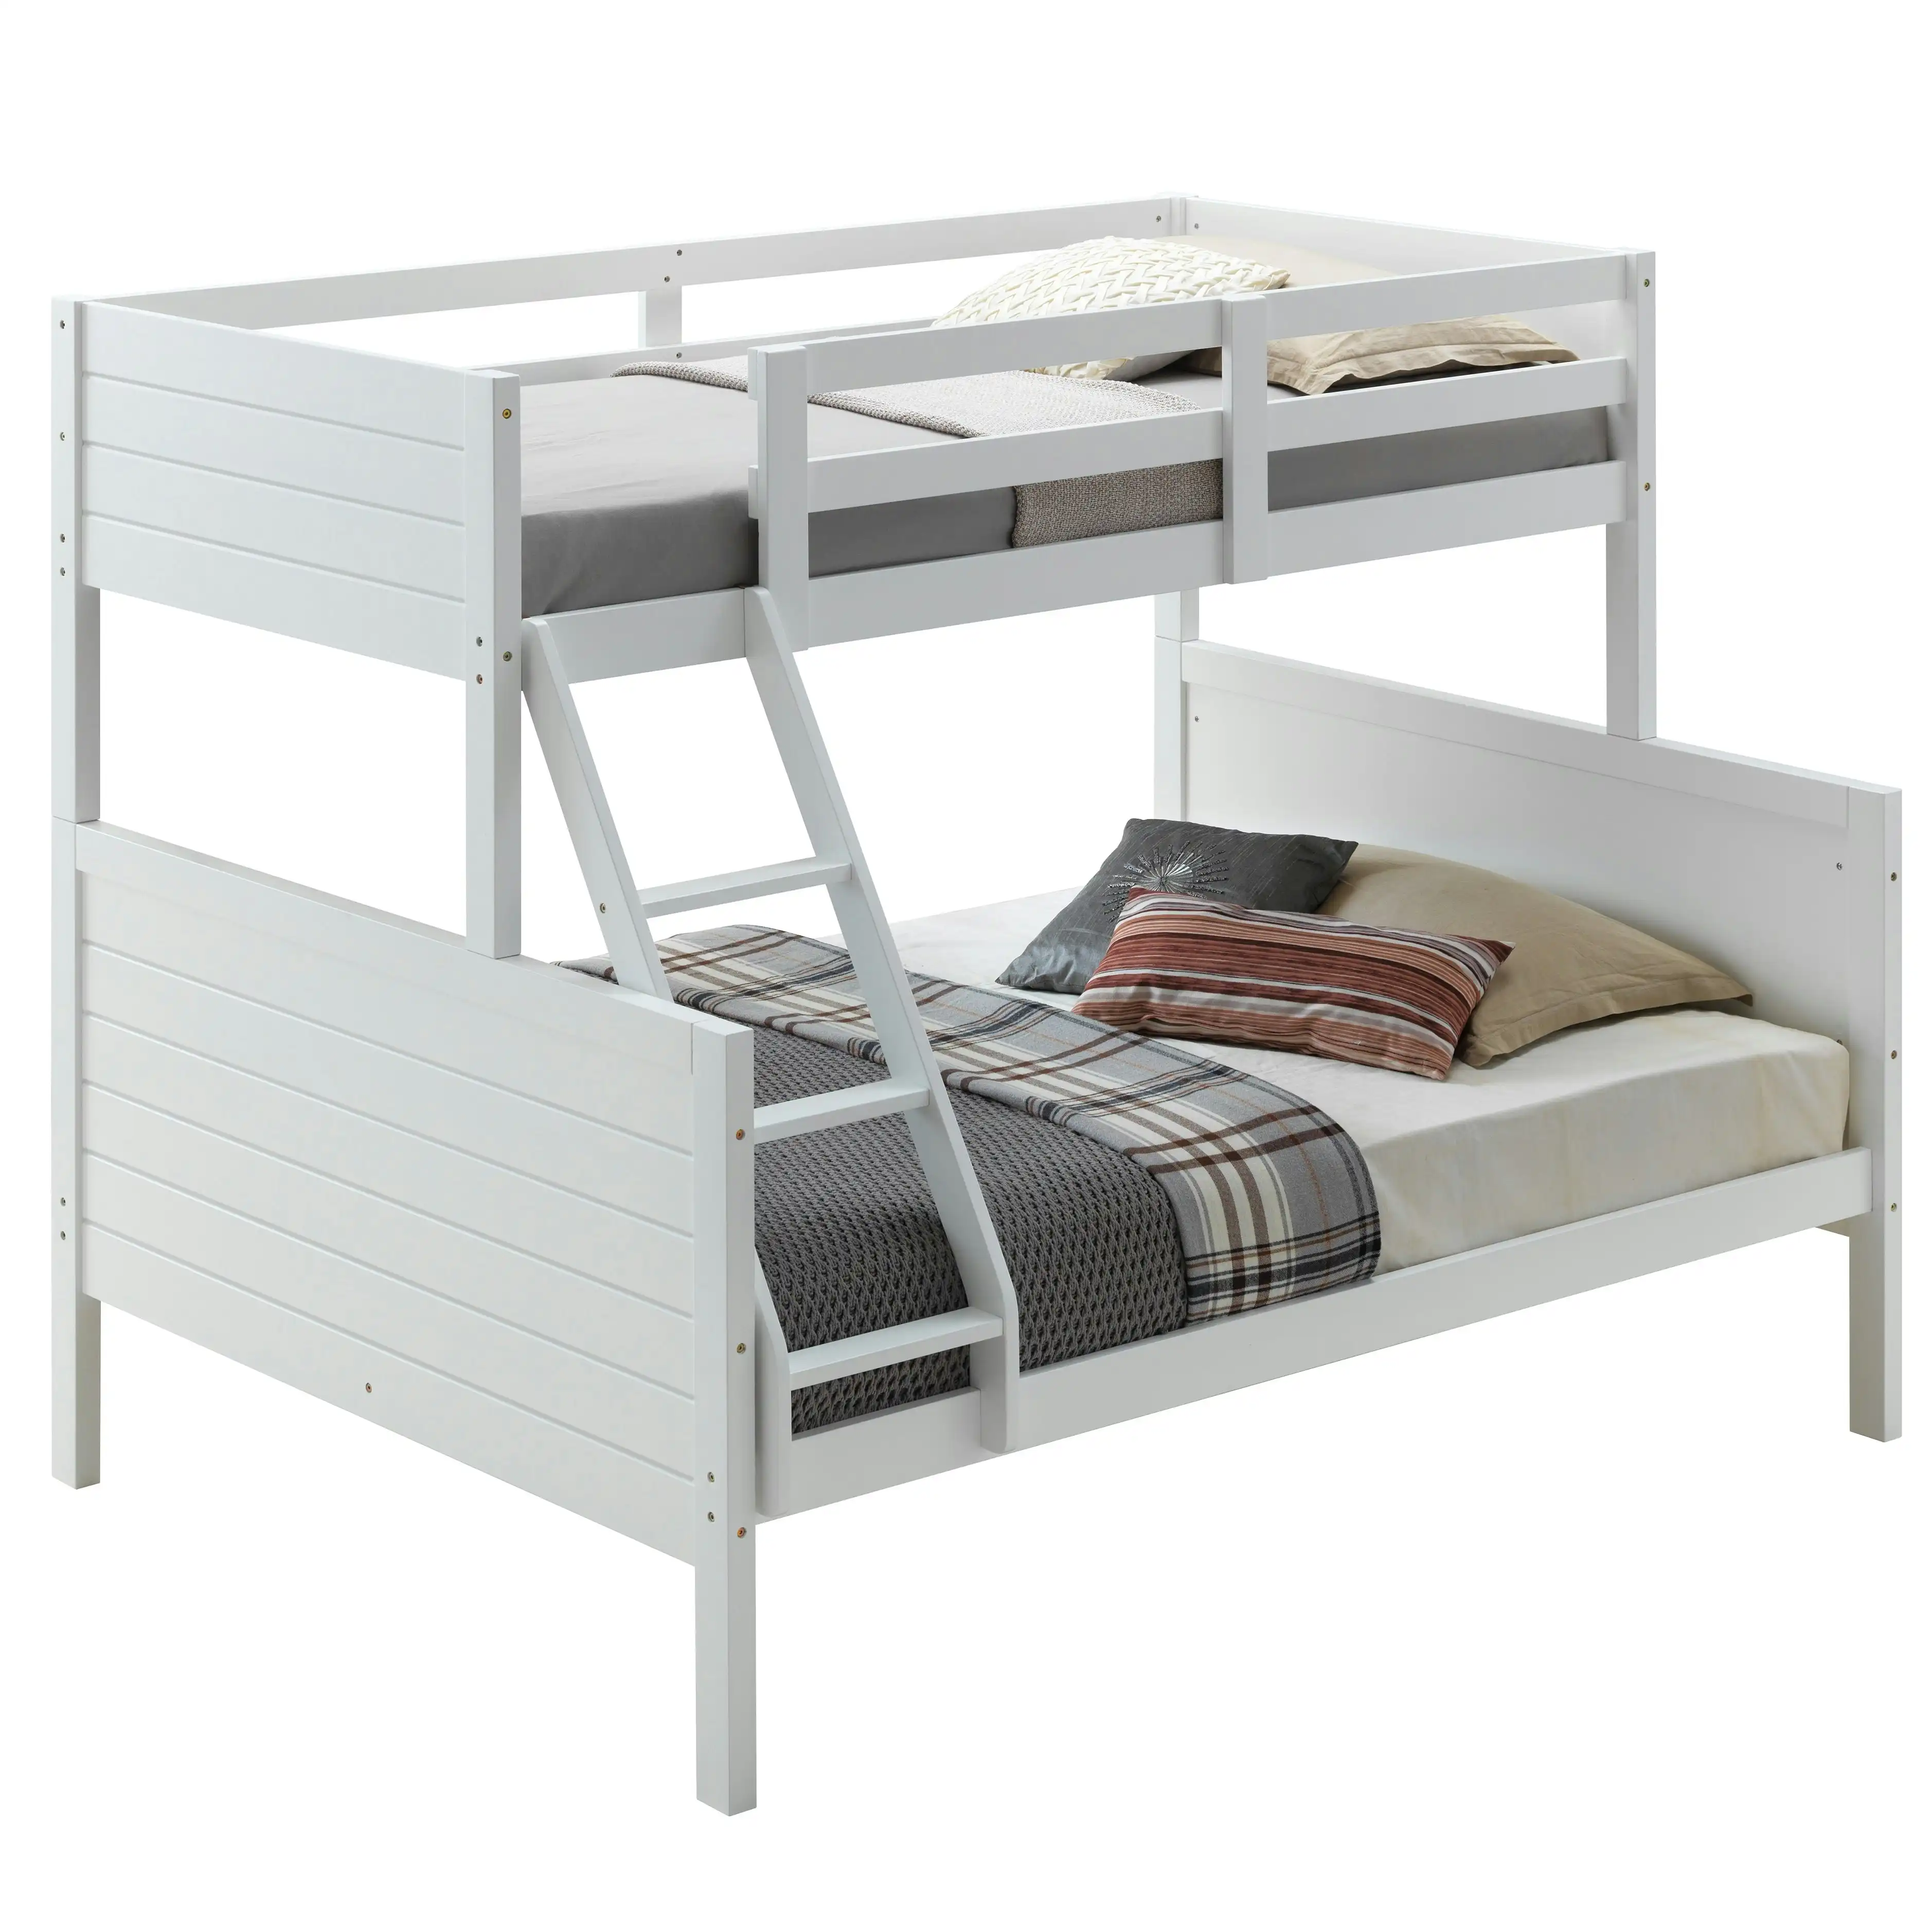 Zinnia Single Over Double Bunk Bed Frame